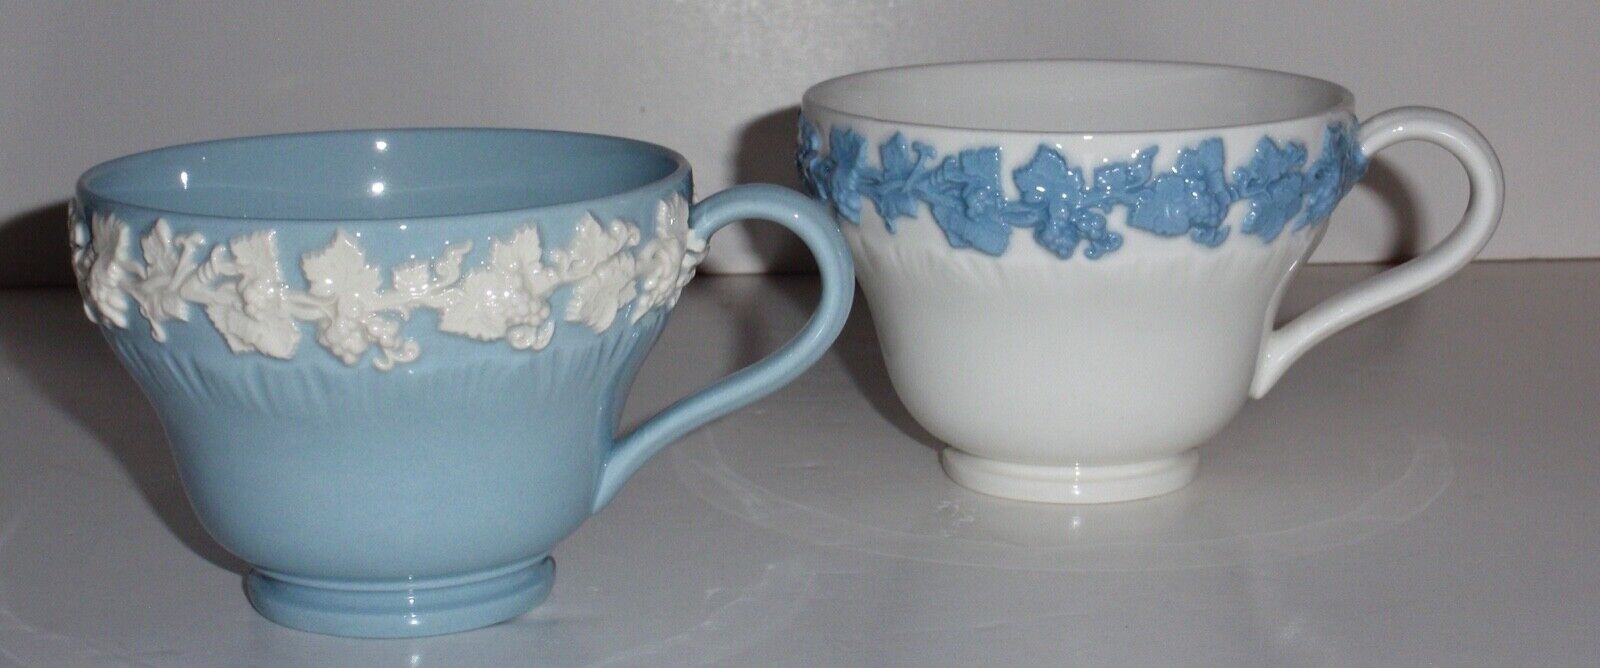 Vintage Wedgwood Embossed Queensware Shell Pattern Cups White/Blue & Blue/White